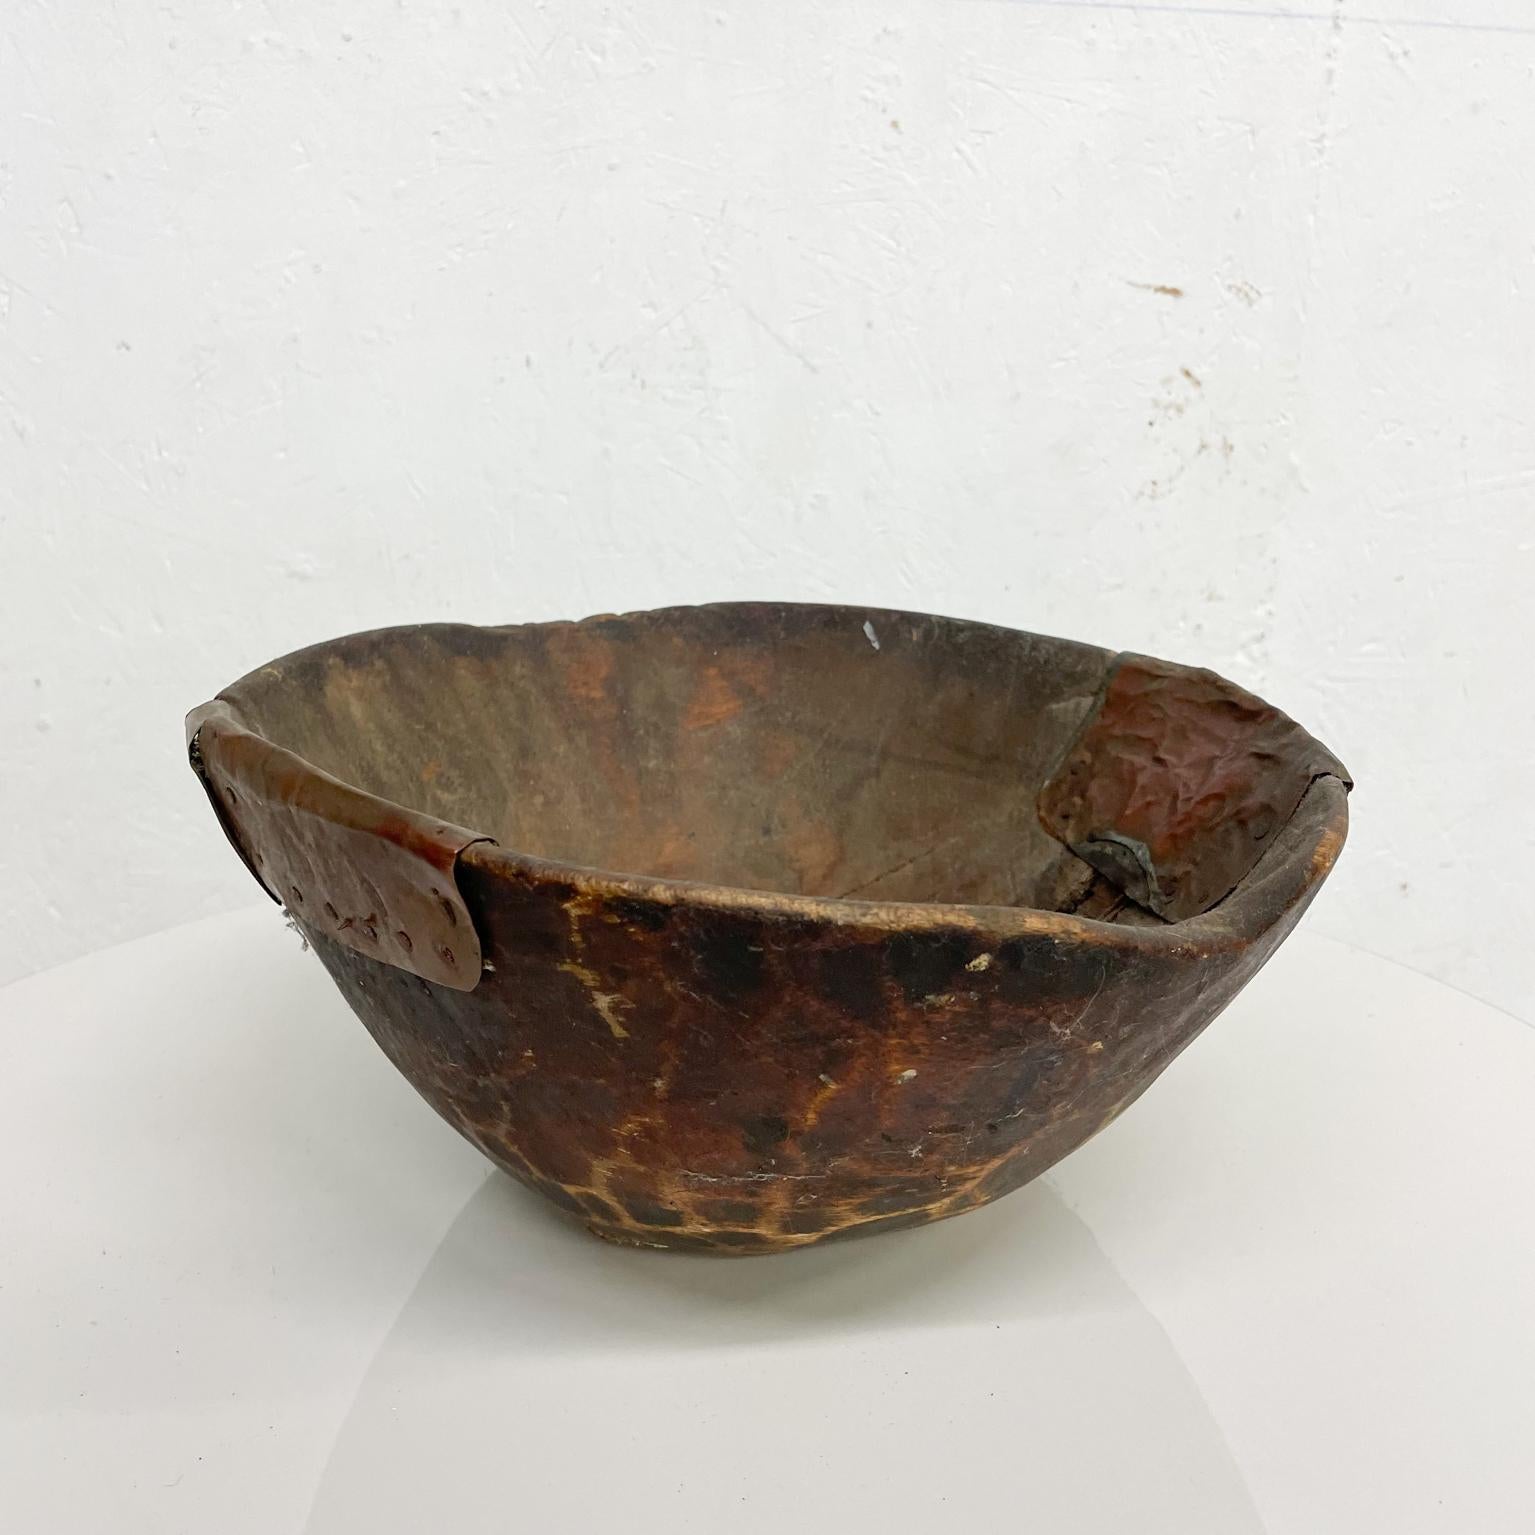 American Handmade Sculptural Antique Rustic Wood Bowl with Decorative Copper